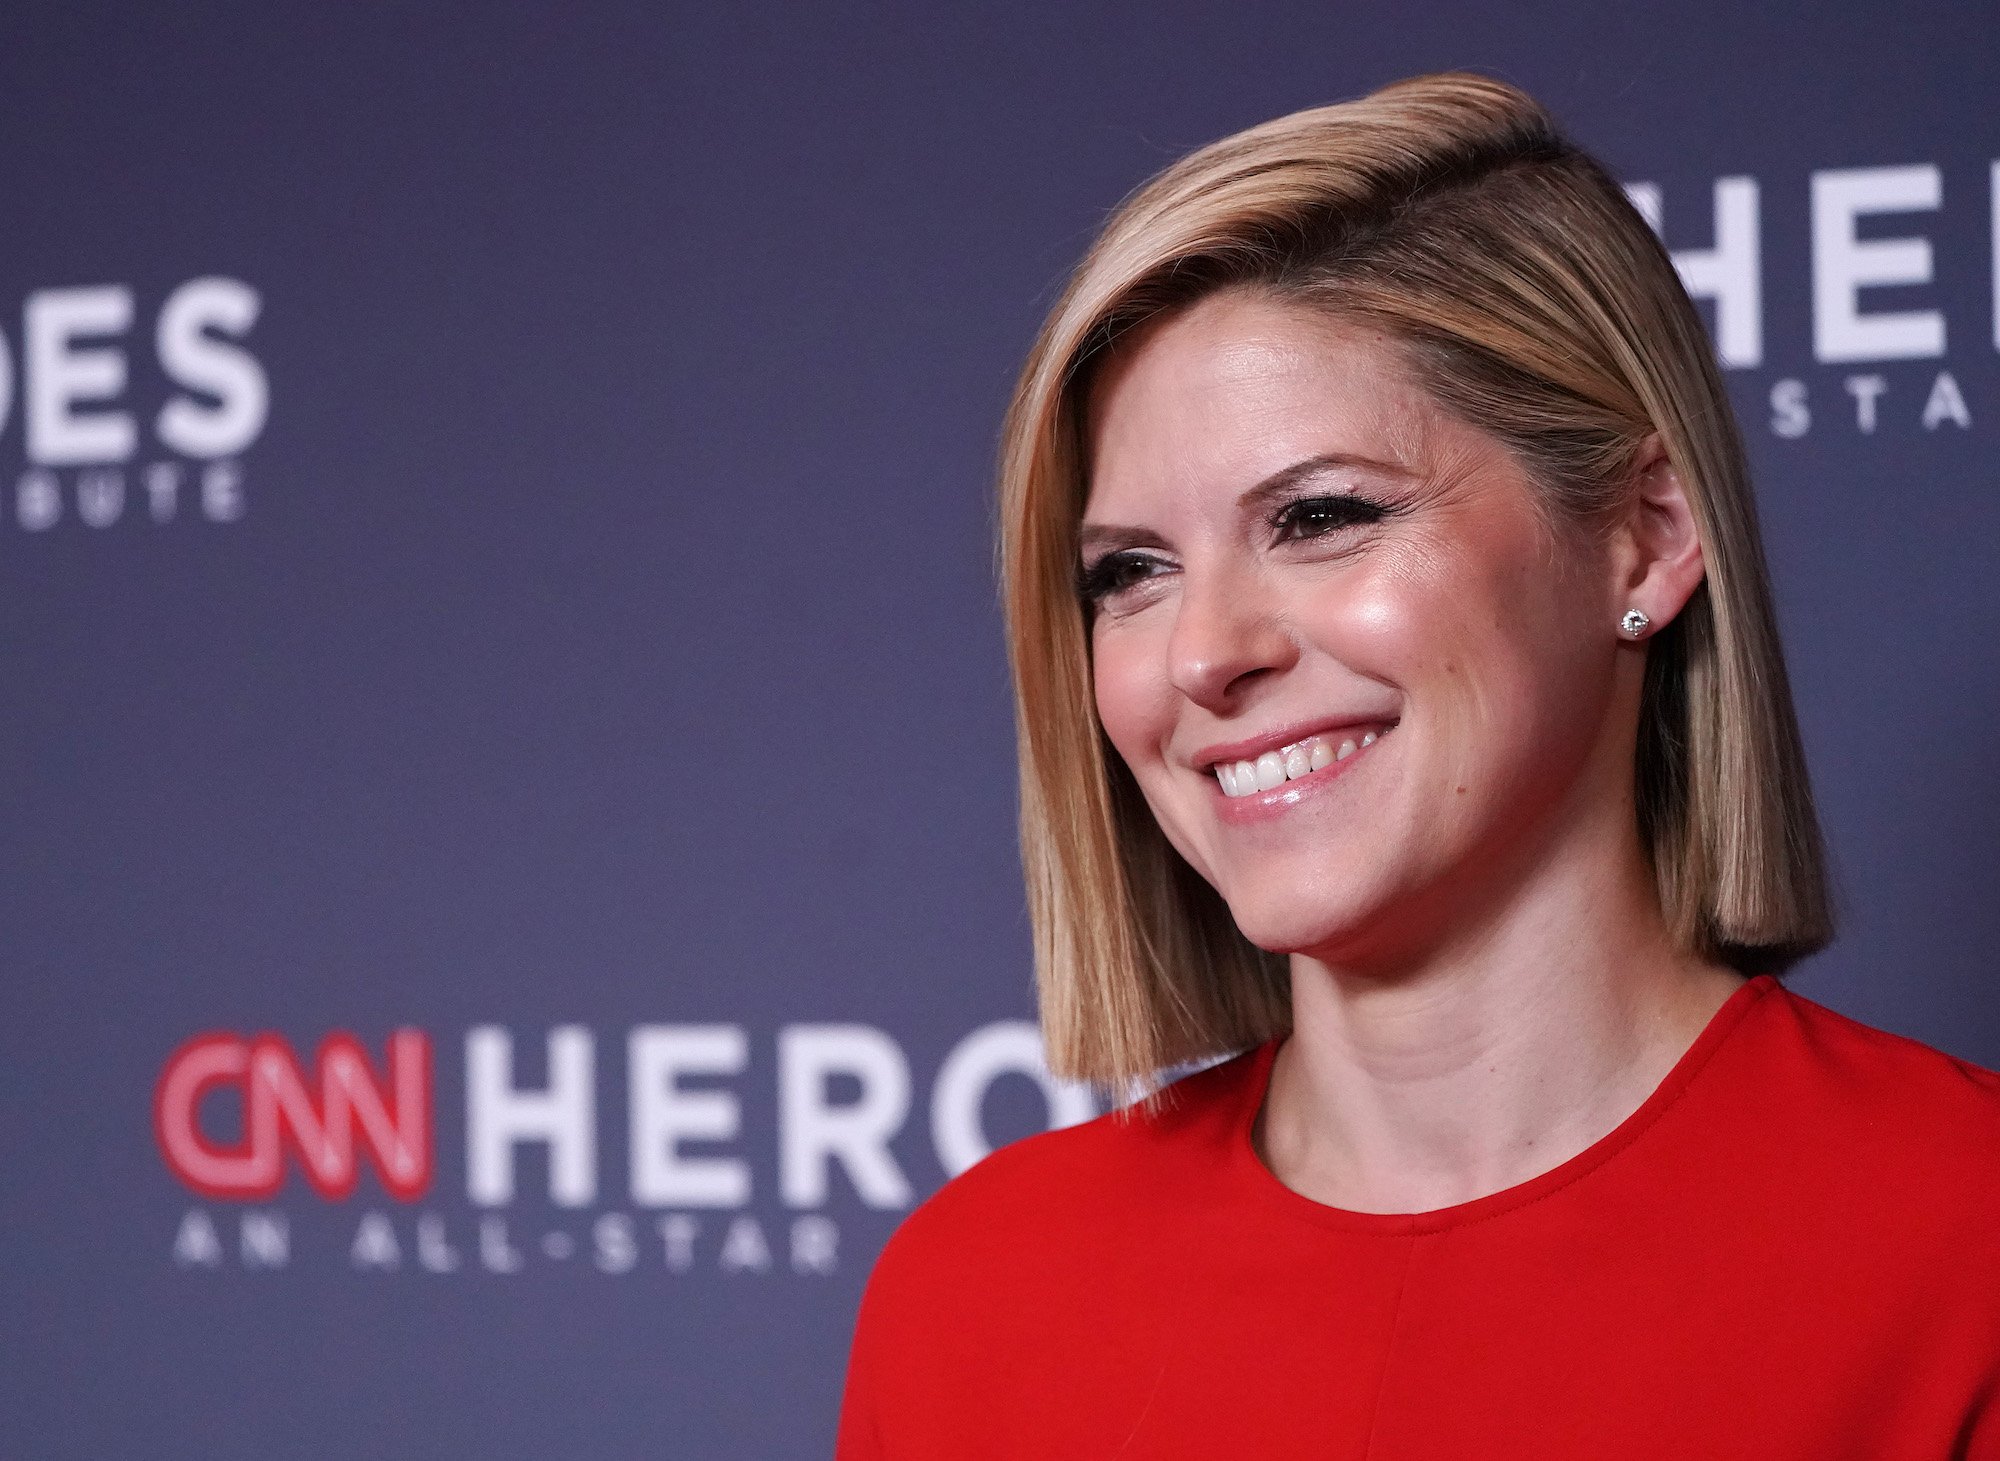 Who Is Cnn S Kate Bolduan S Husband She is the anchor of at this hour with kate...